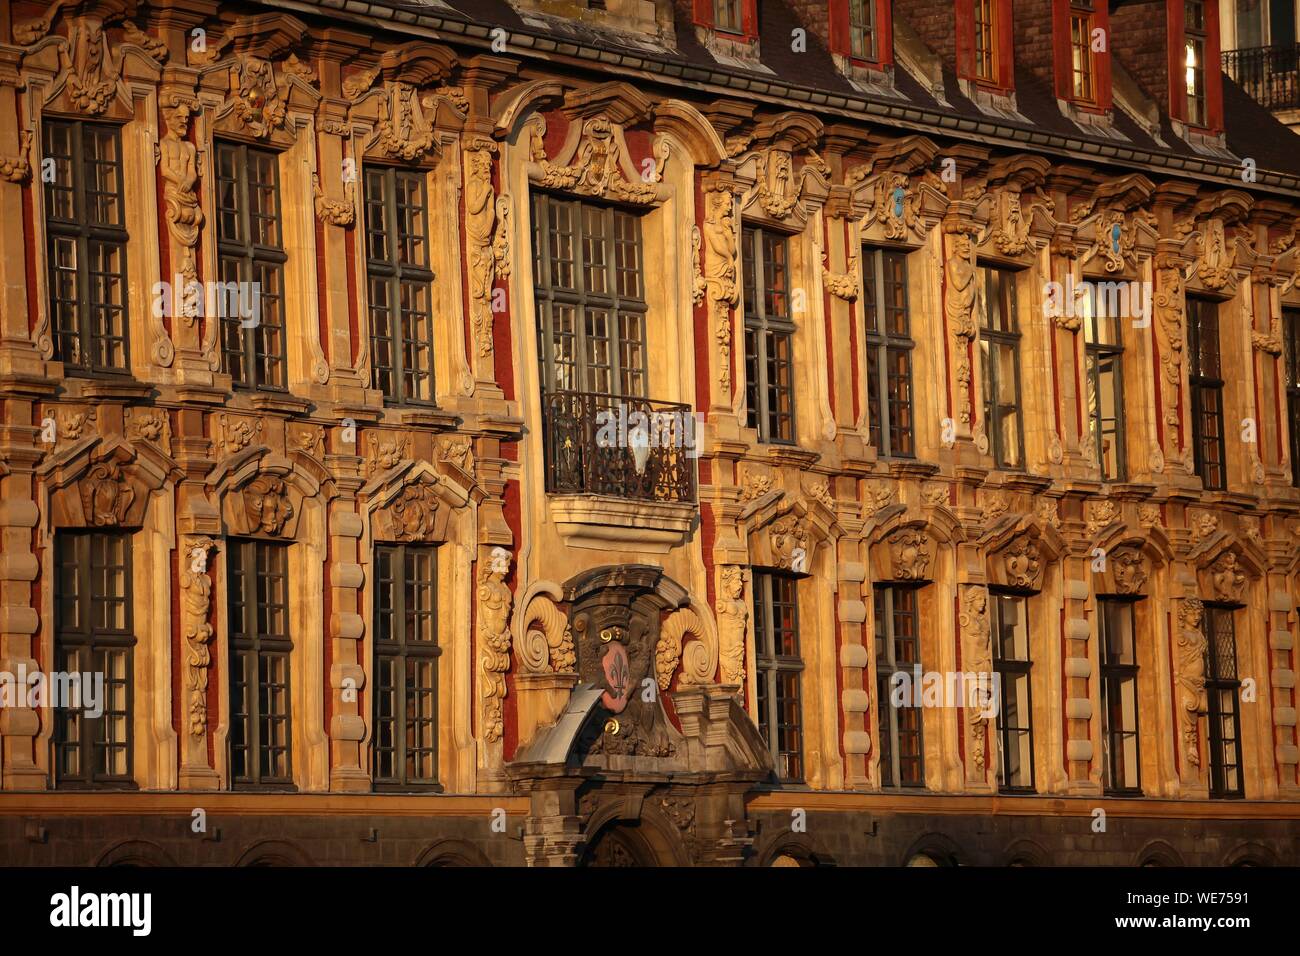 France, Nord, Lille, The facade of the Old Stock Exchange of Lille on the Grande Place de Lille Stock Photo